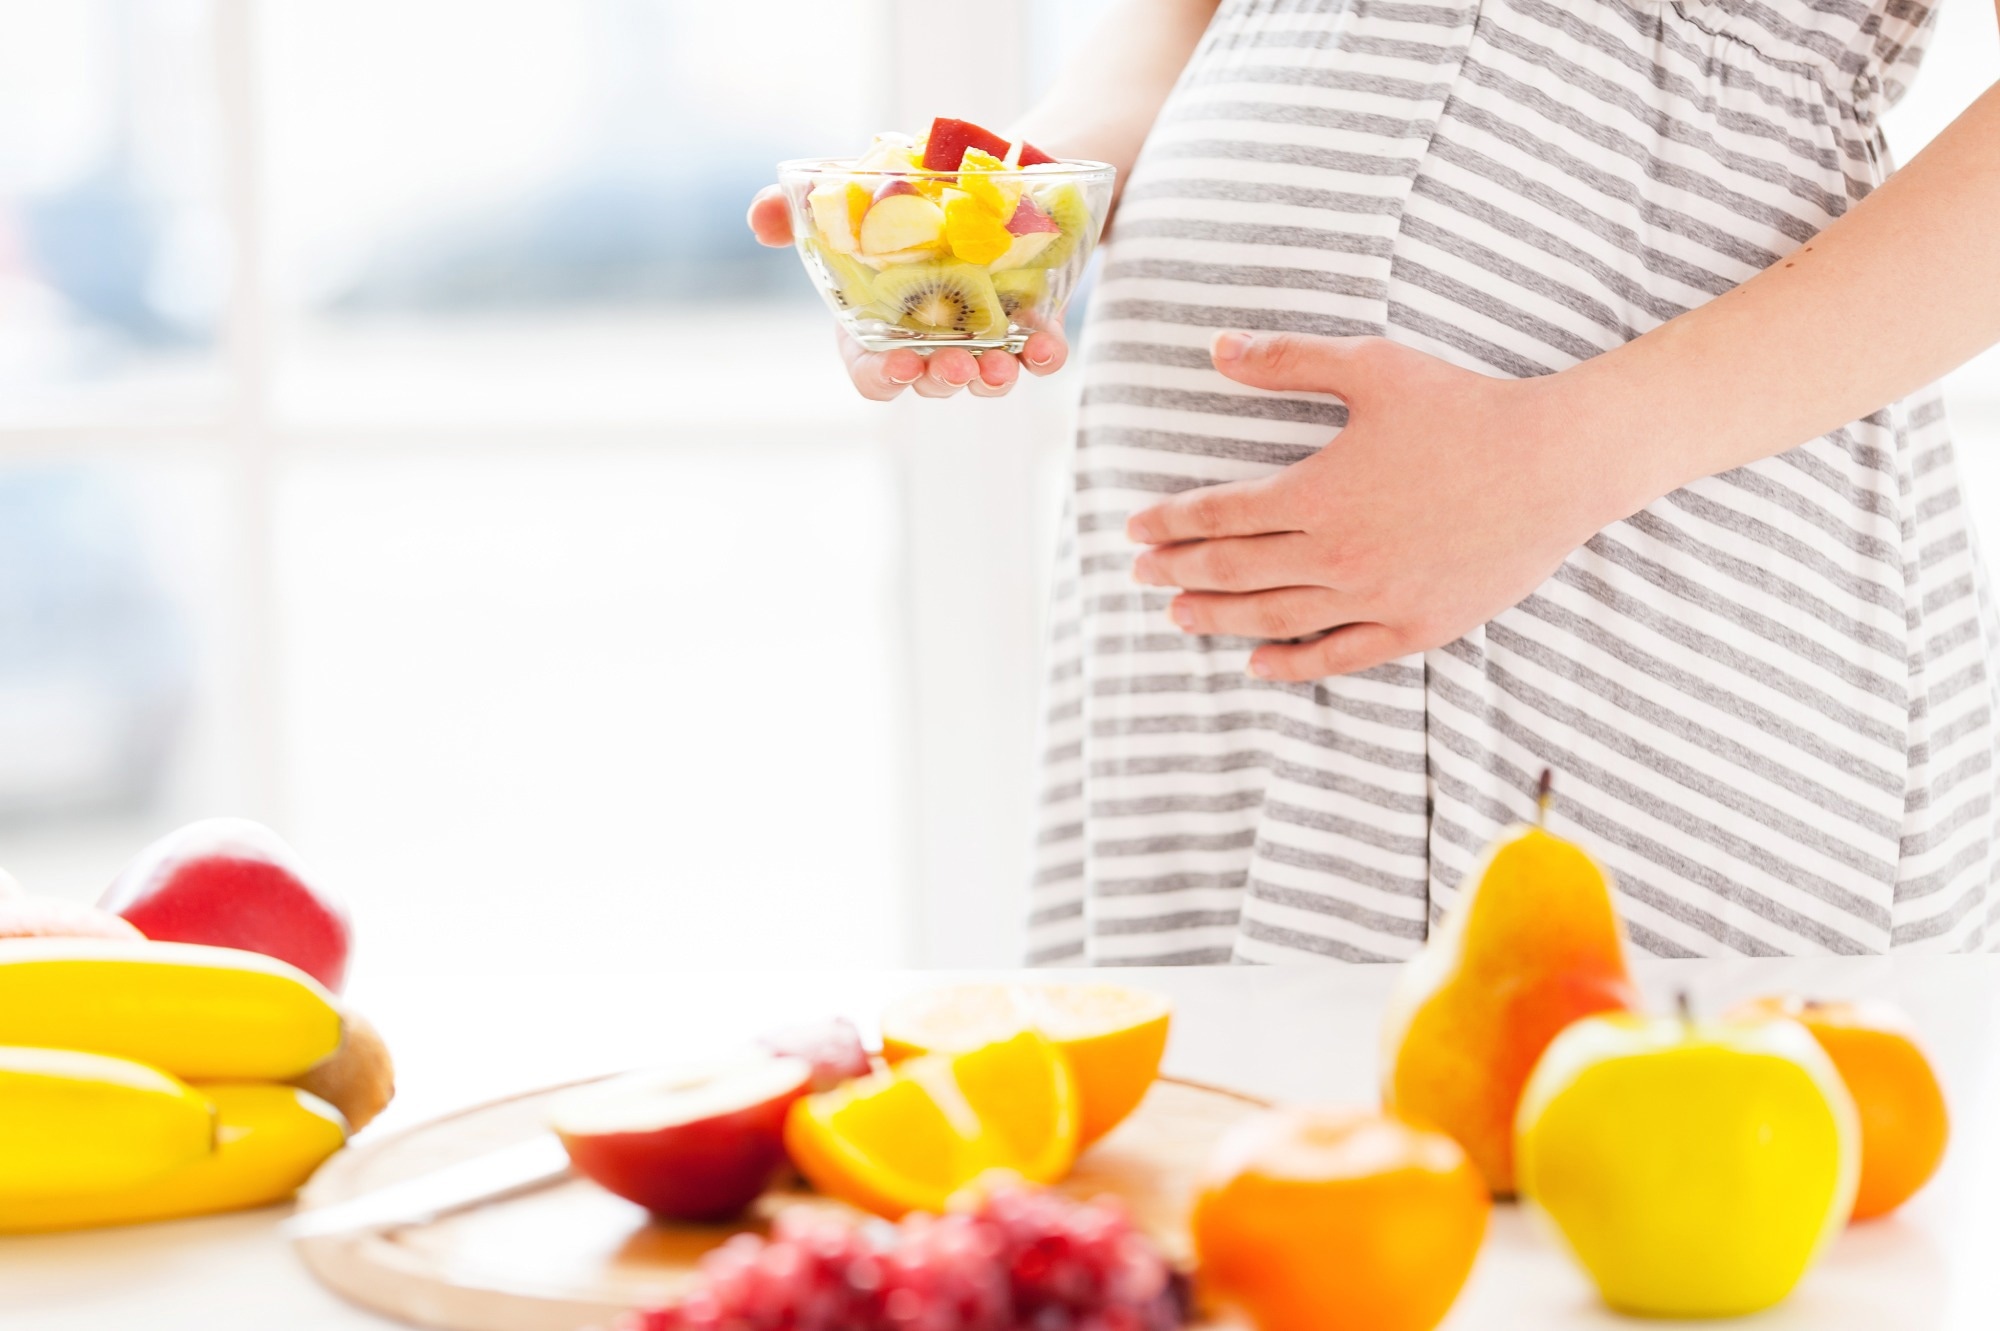 Study: The Effect of Maternal Dietary Patterns on Birth Weight for Gestational Age: Findings from the MAMI-MED Cohort. Image Credit: G-StockStudio/Shutterstock.com